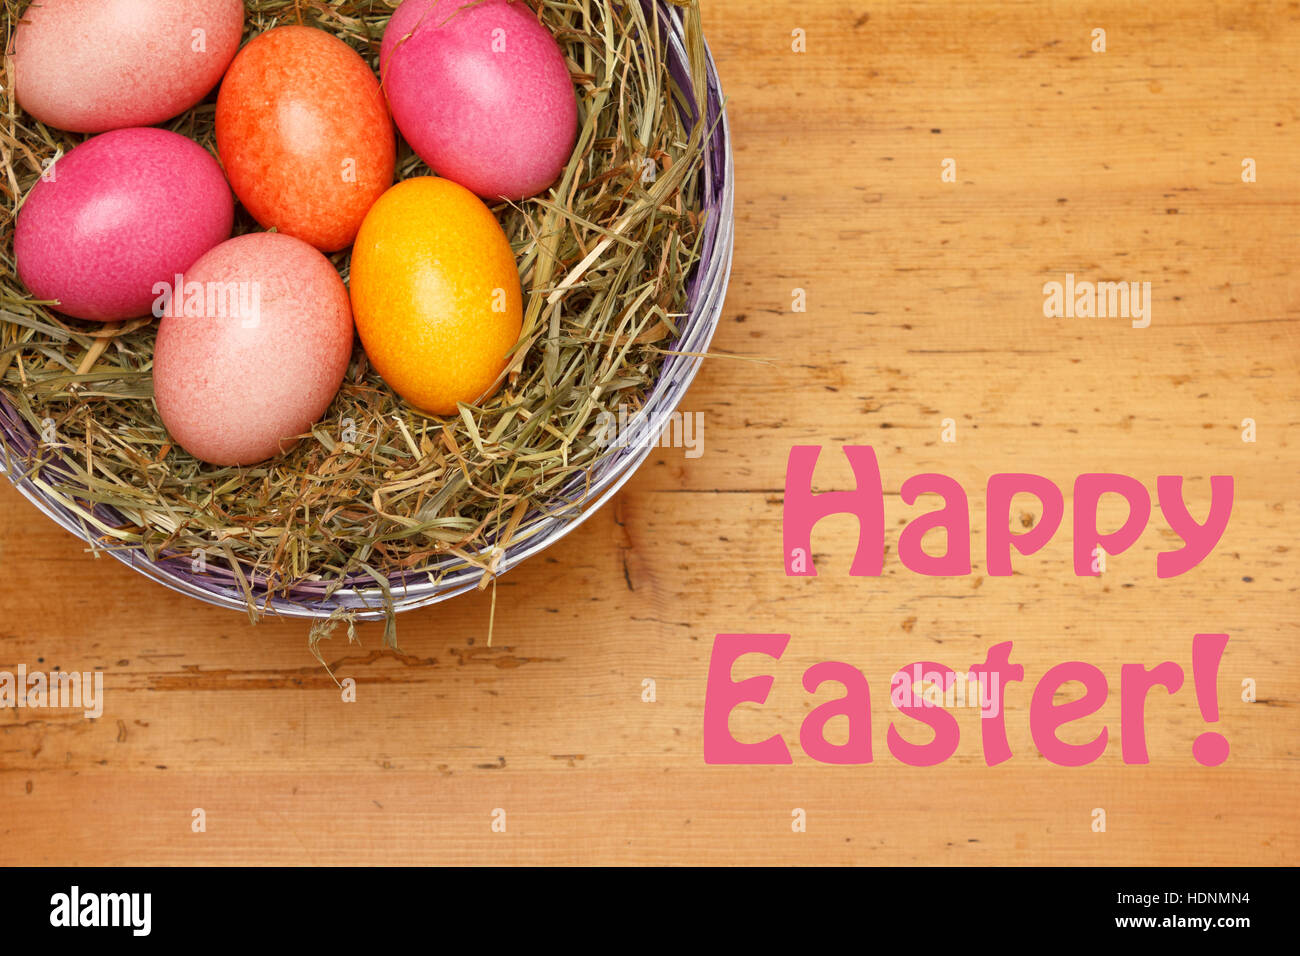 Template Happy Easter with 6 Easter Eggs in soft colors in a basket with straw on a vintage wooden background, retro design Stock Photo